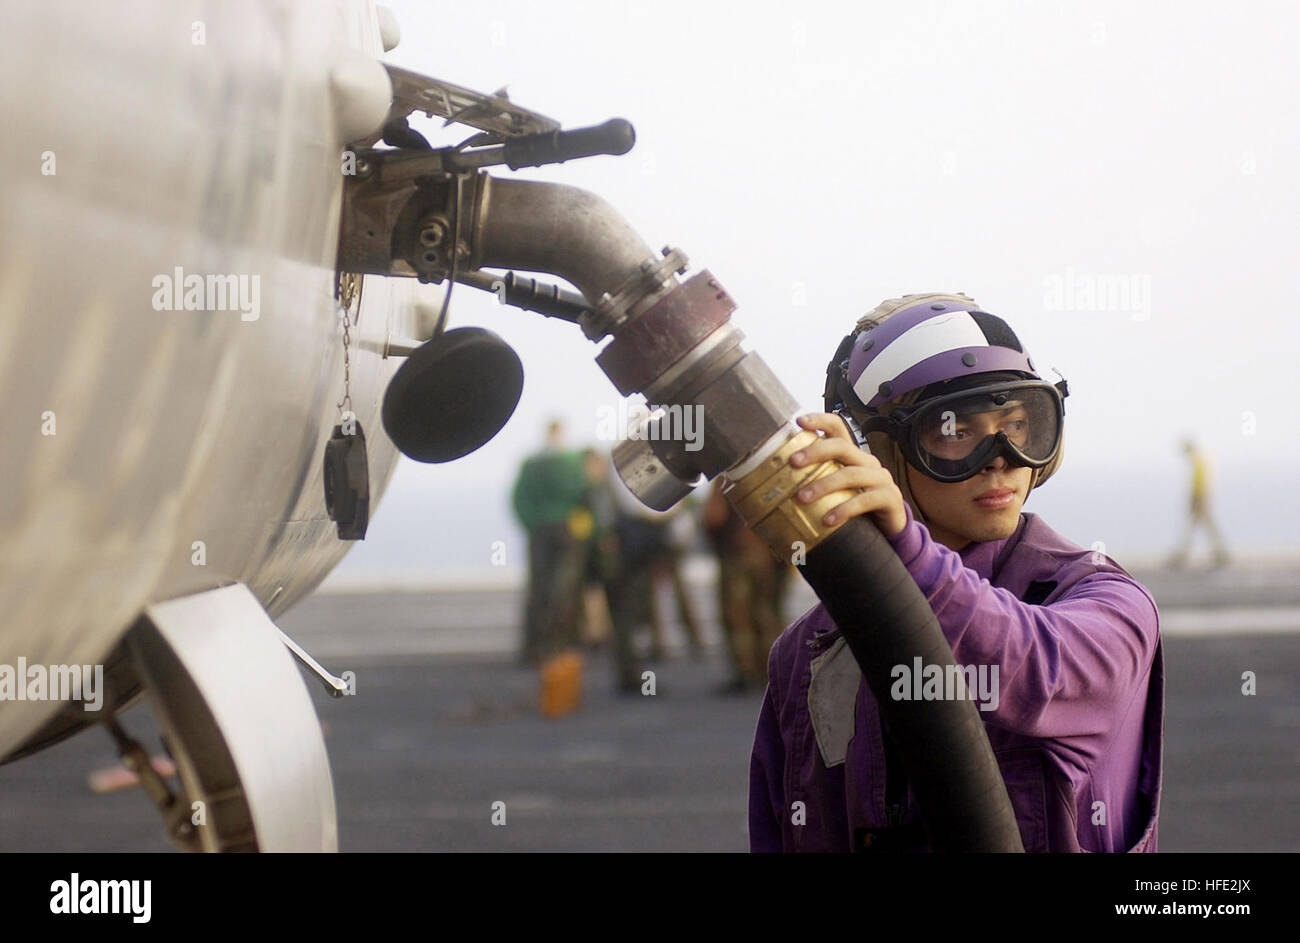 040722-N-5464G-011 Pacific Ocean (July 22, 2004) - Airman Kevin Logan of Los Angeles, Calif., refuels a 'Go Bird' on the flight aboard USS Kitty Hawk (CV 63). ÒGo BirdÓ refers to aircraft made ready for the next scheduled launch cycle. Kitty Hawk is one of seven carrier strike groups (CSGs) involved in Summer Pulse 2004. Summer Pulse 2004 is the deployment of seven carrier strike groups (CSGs), demonstrating the ability of the Navy to provide credible combat capability across the globe, in five theaters with other U.S., allied, and coalition military forces. Summer Pulse is the NavyÕs first de Stock Photo